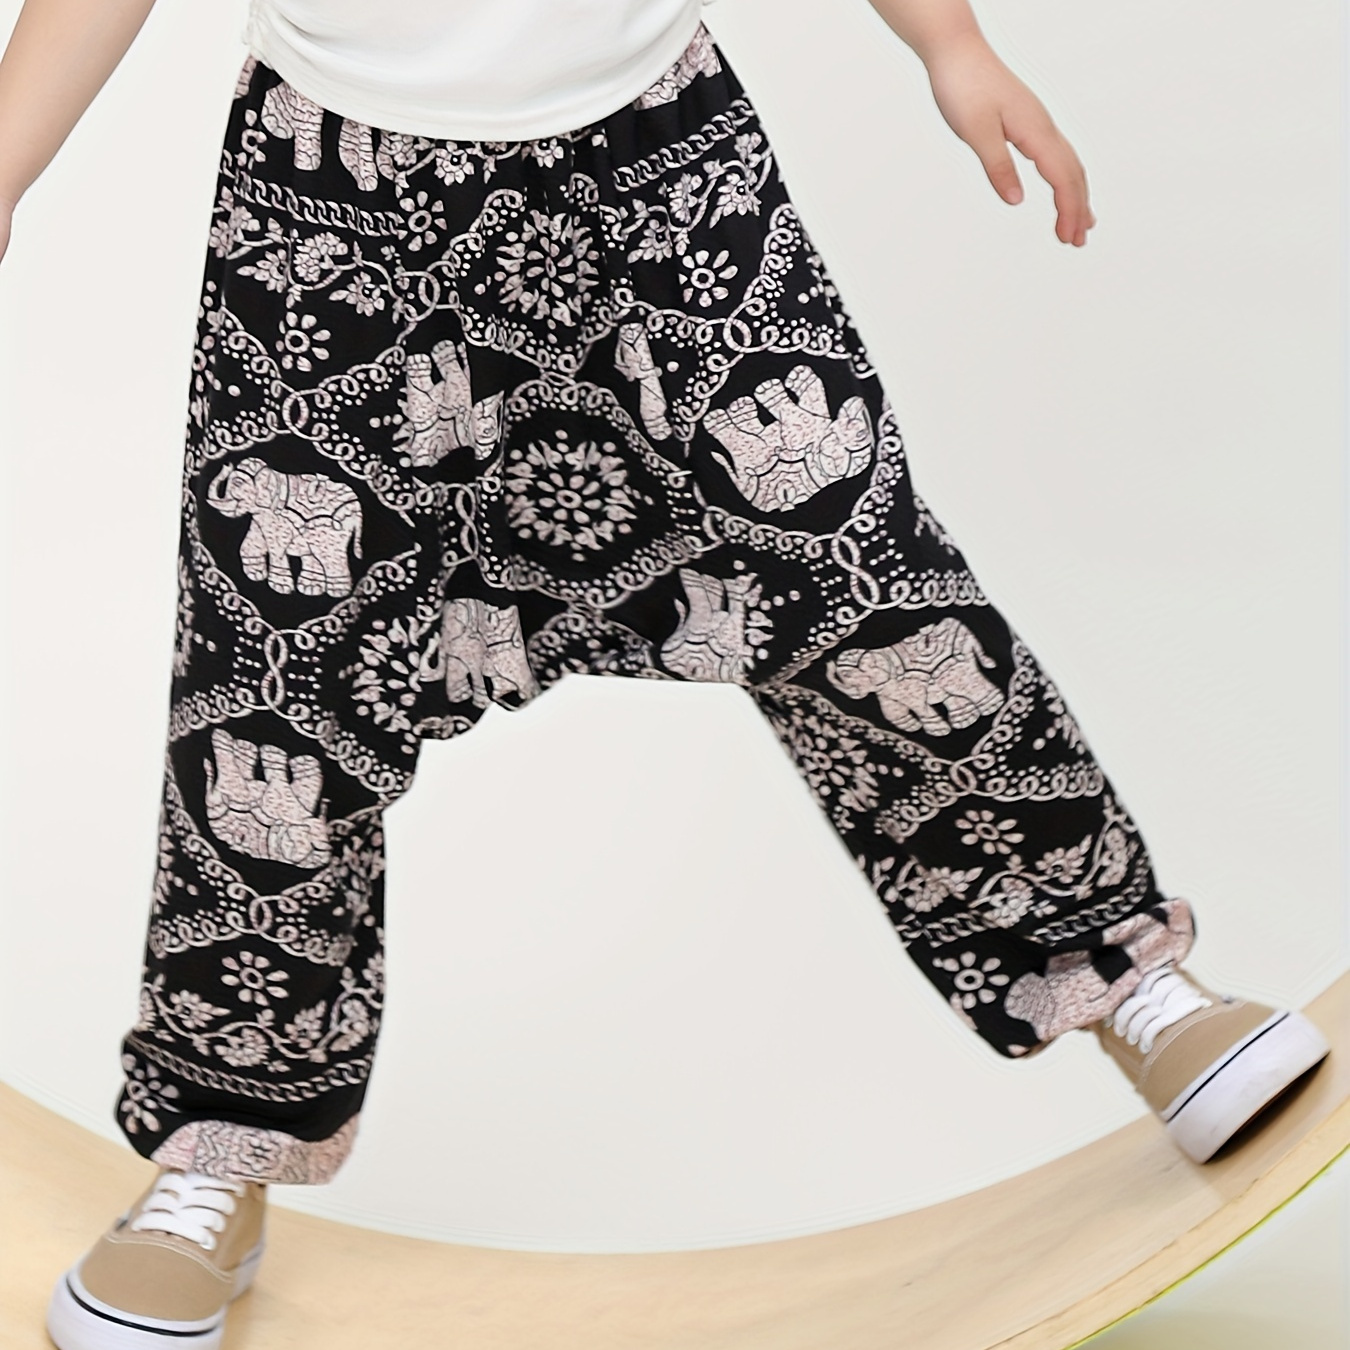 

Unisex Harem Pants, Elephant Pattern, Loose Fit, Thin Summer Fabric, Casual Style, Drop Crotch, Breathable For Boys And Girls, Outdoor Leisure Trousers, Black And White